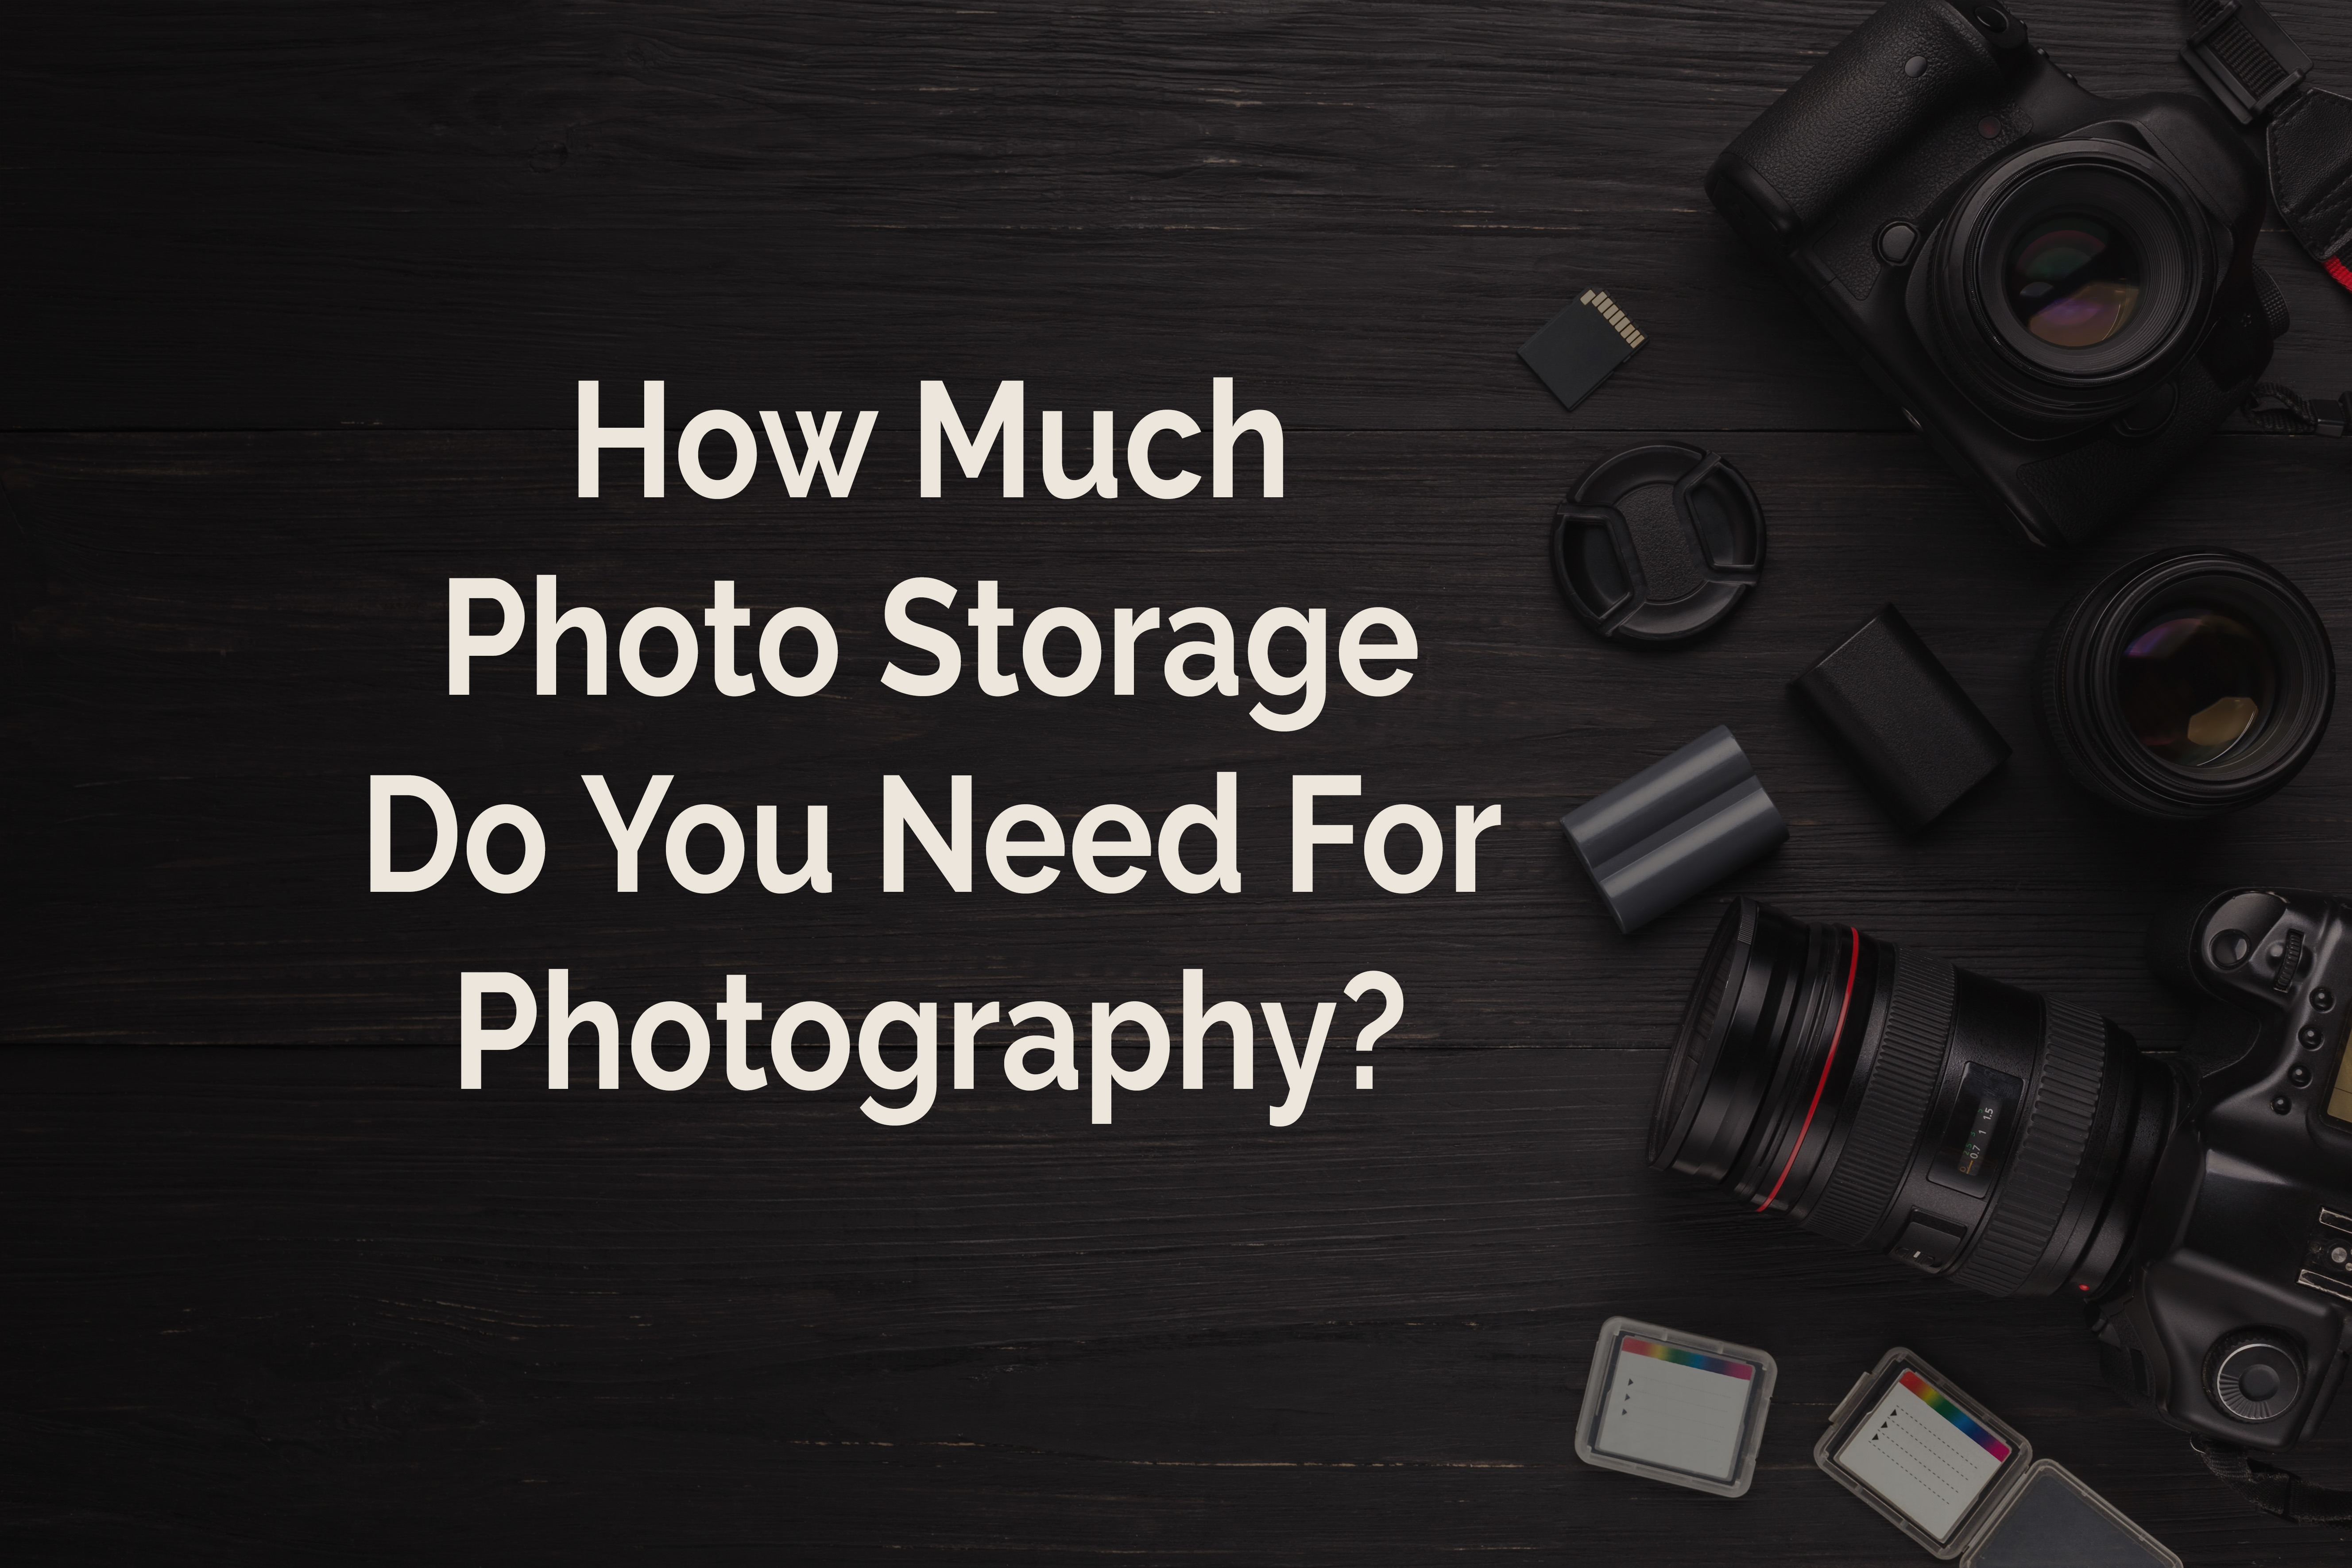 How Much Photo Storage Do You Need for Photography?